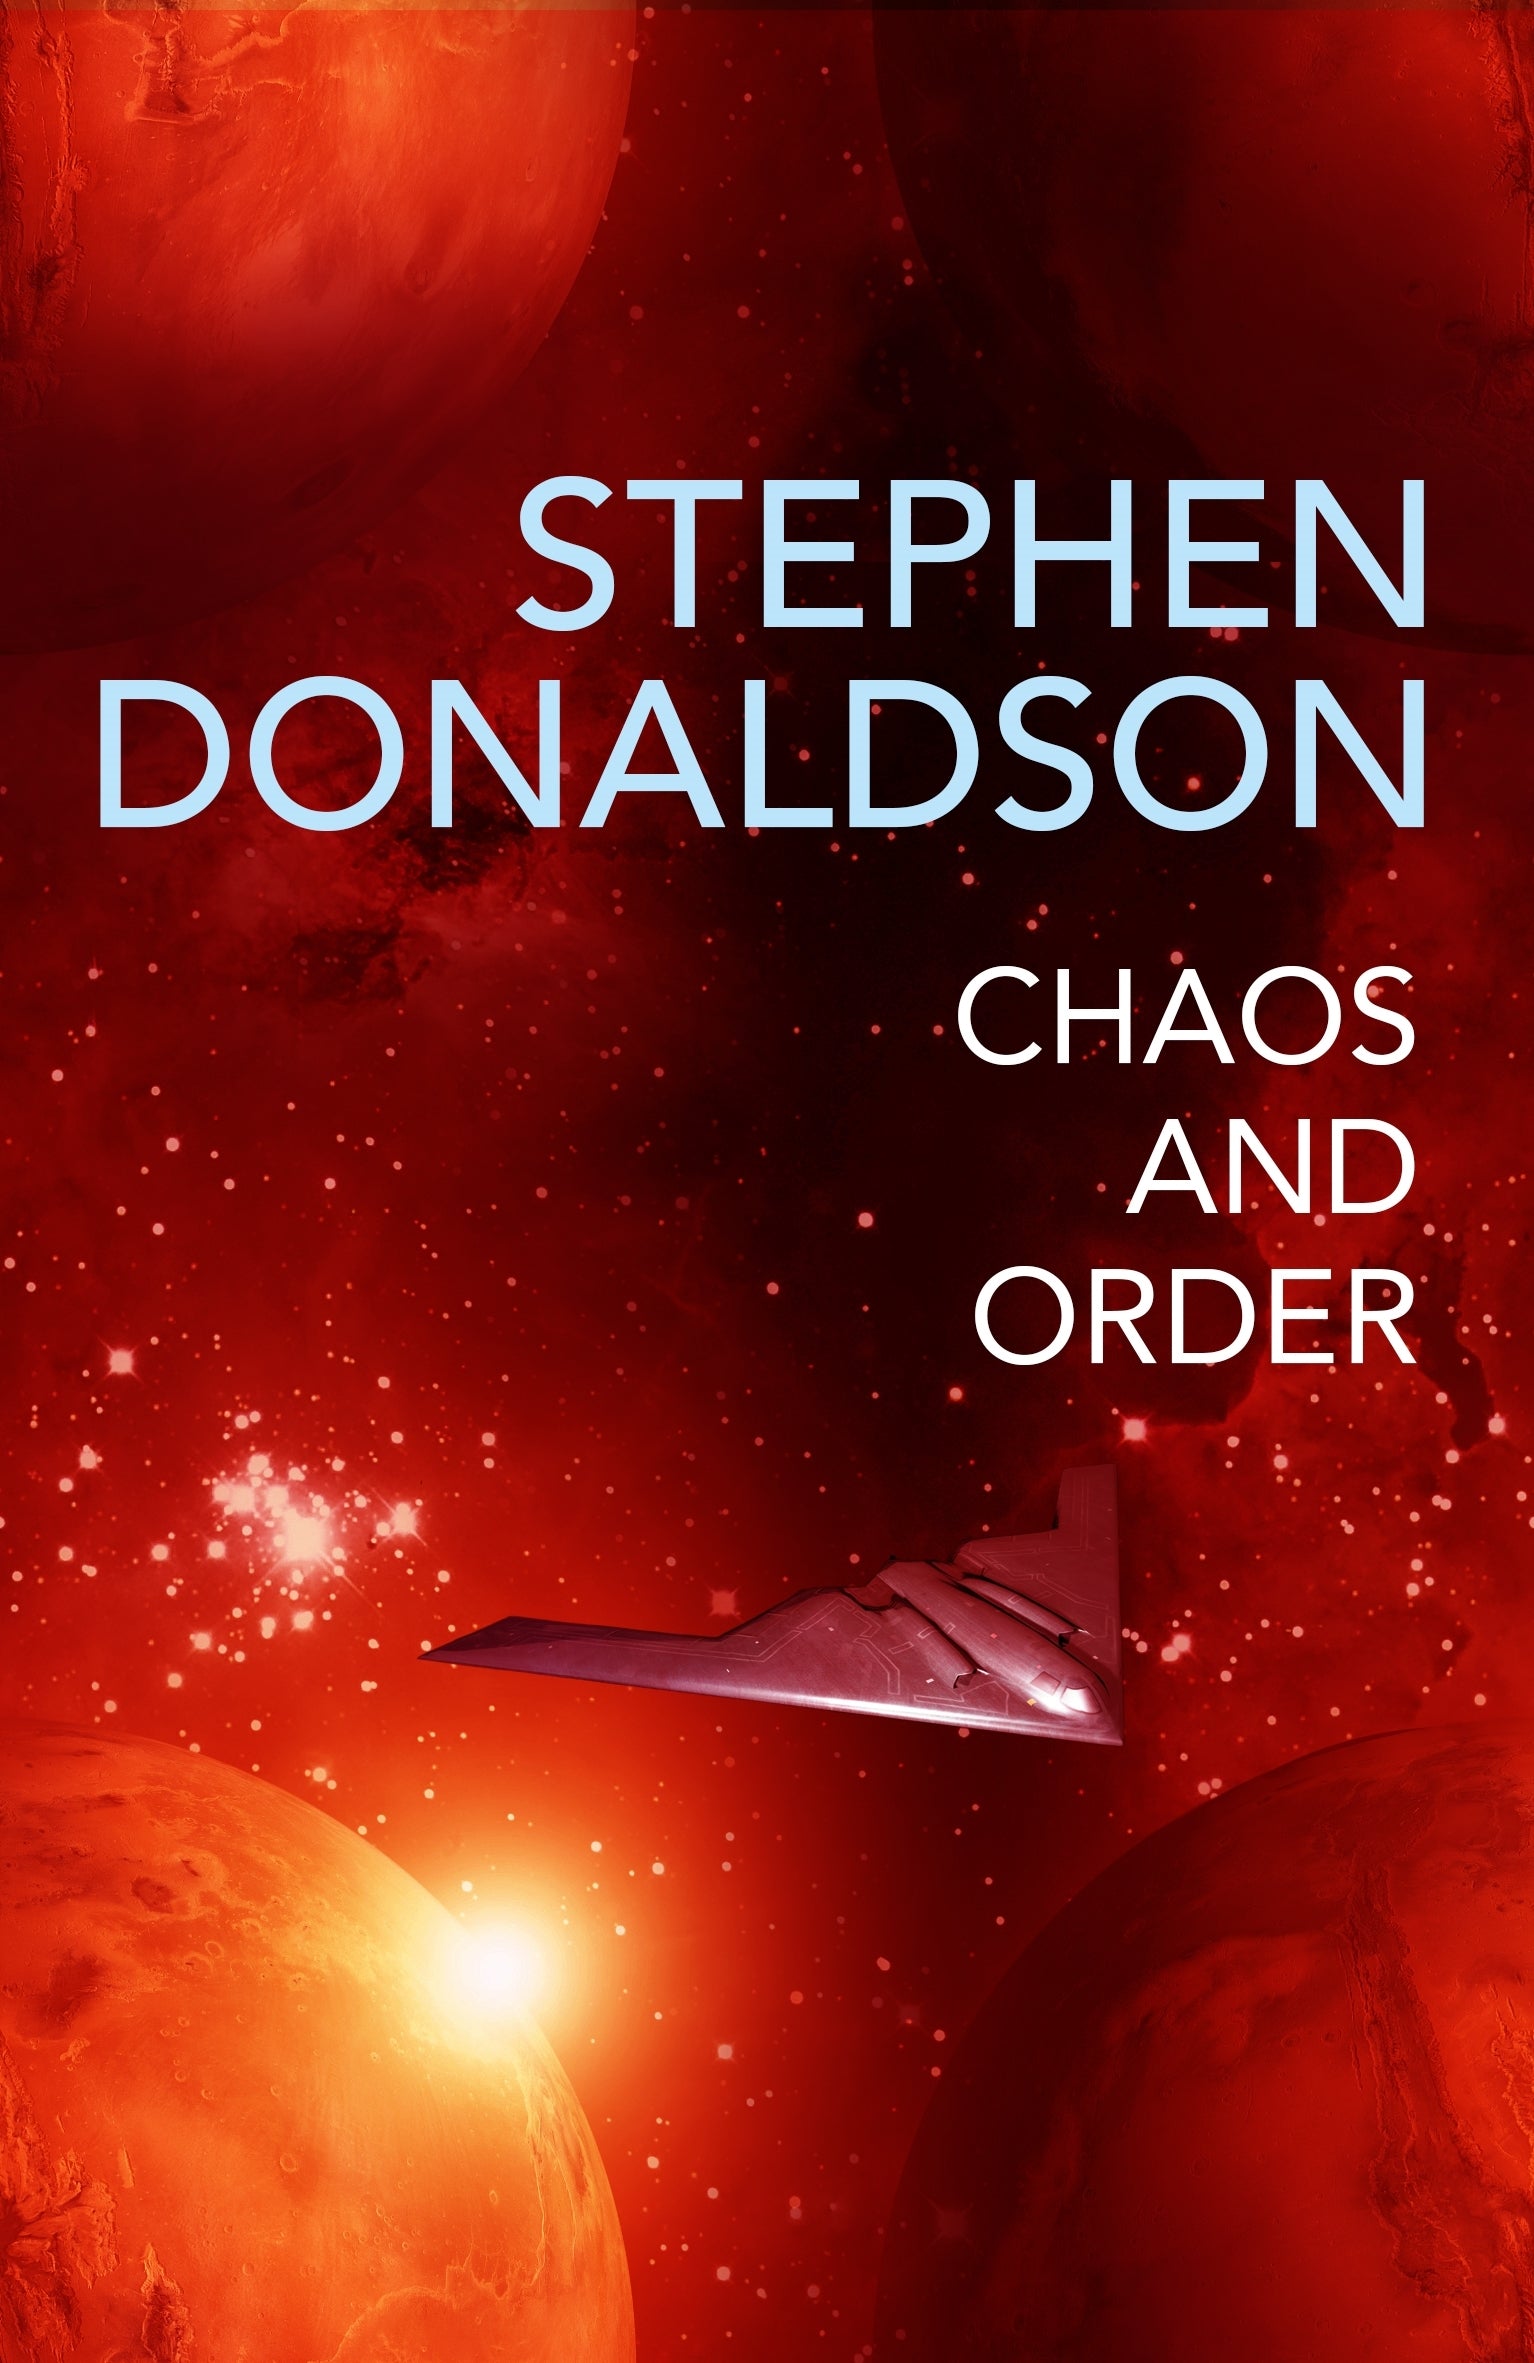 Chaos and Order by Stephen Donaldson